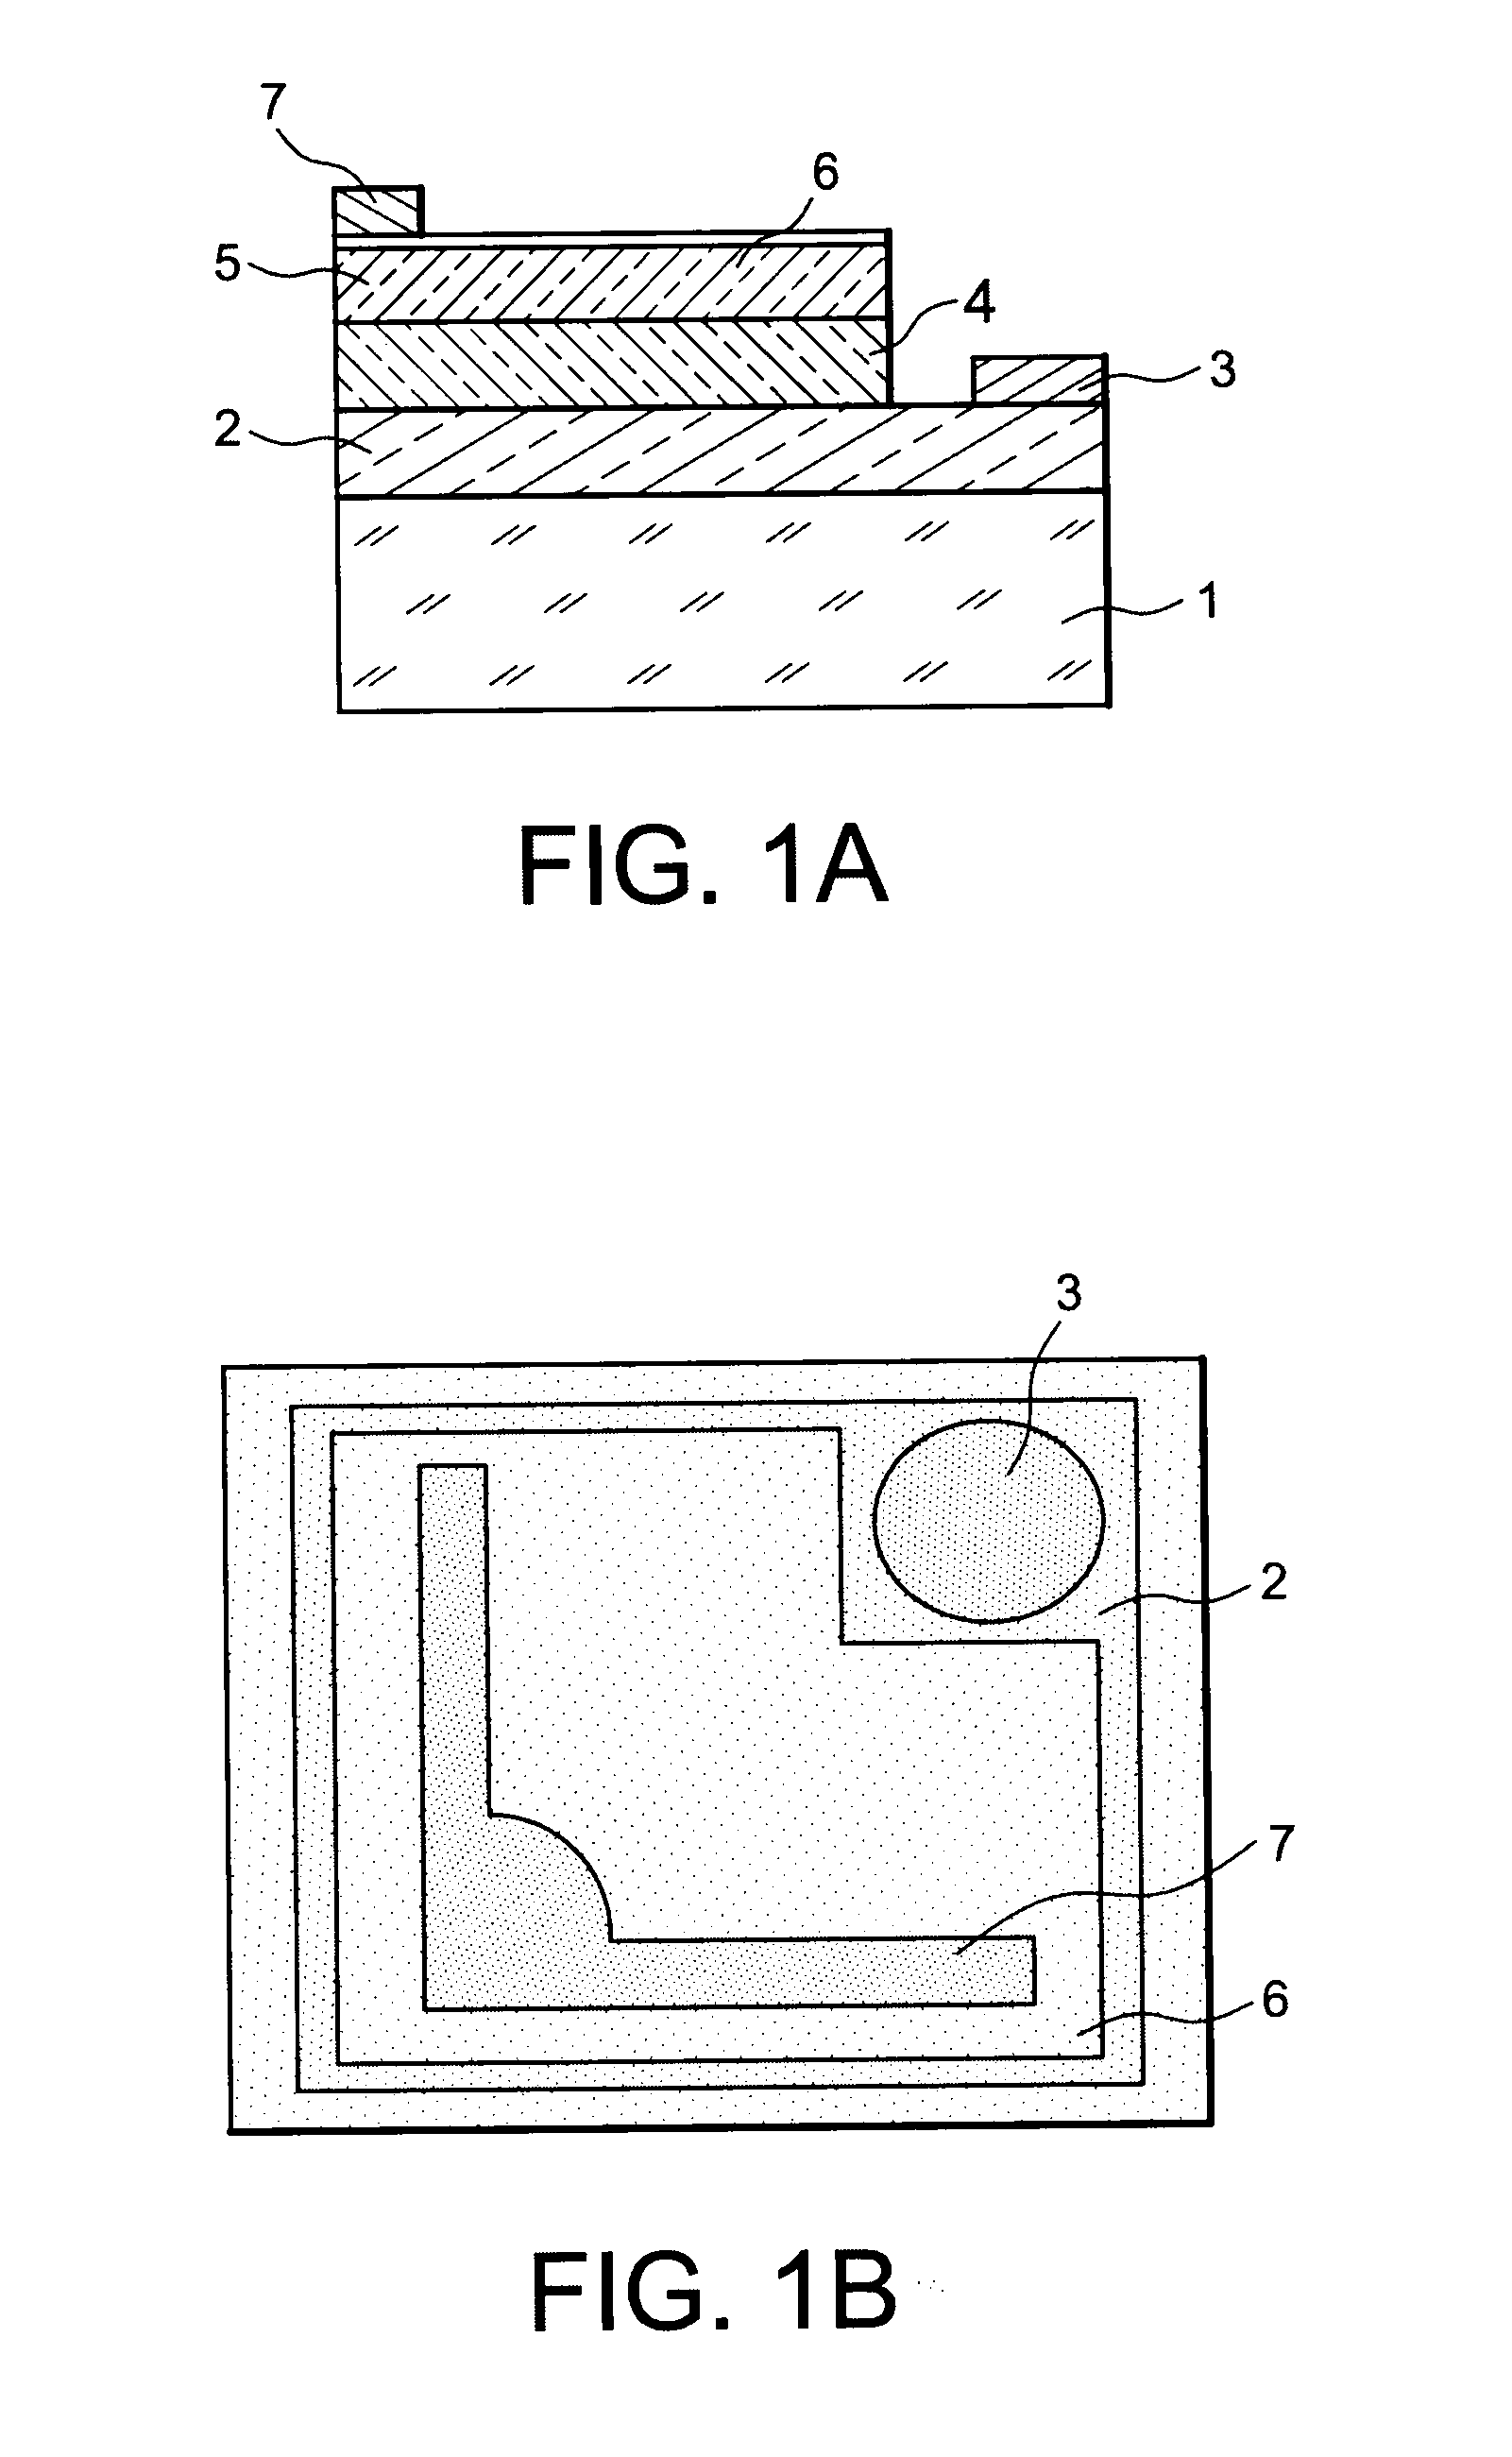 Process of making a microelectronic light-emitting device on semi-conducting nanowire formed on a metallic substrate